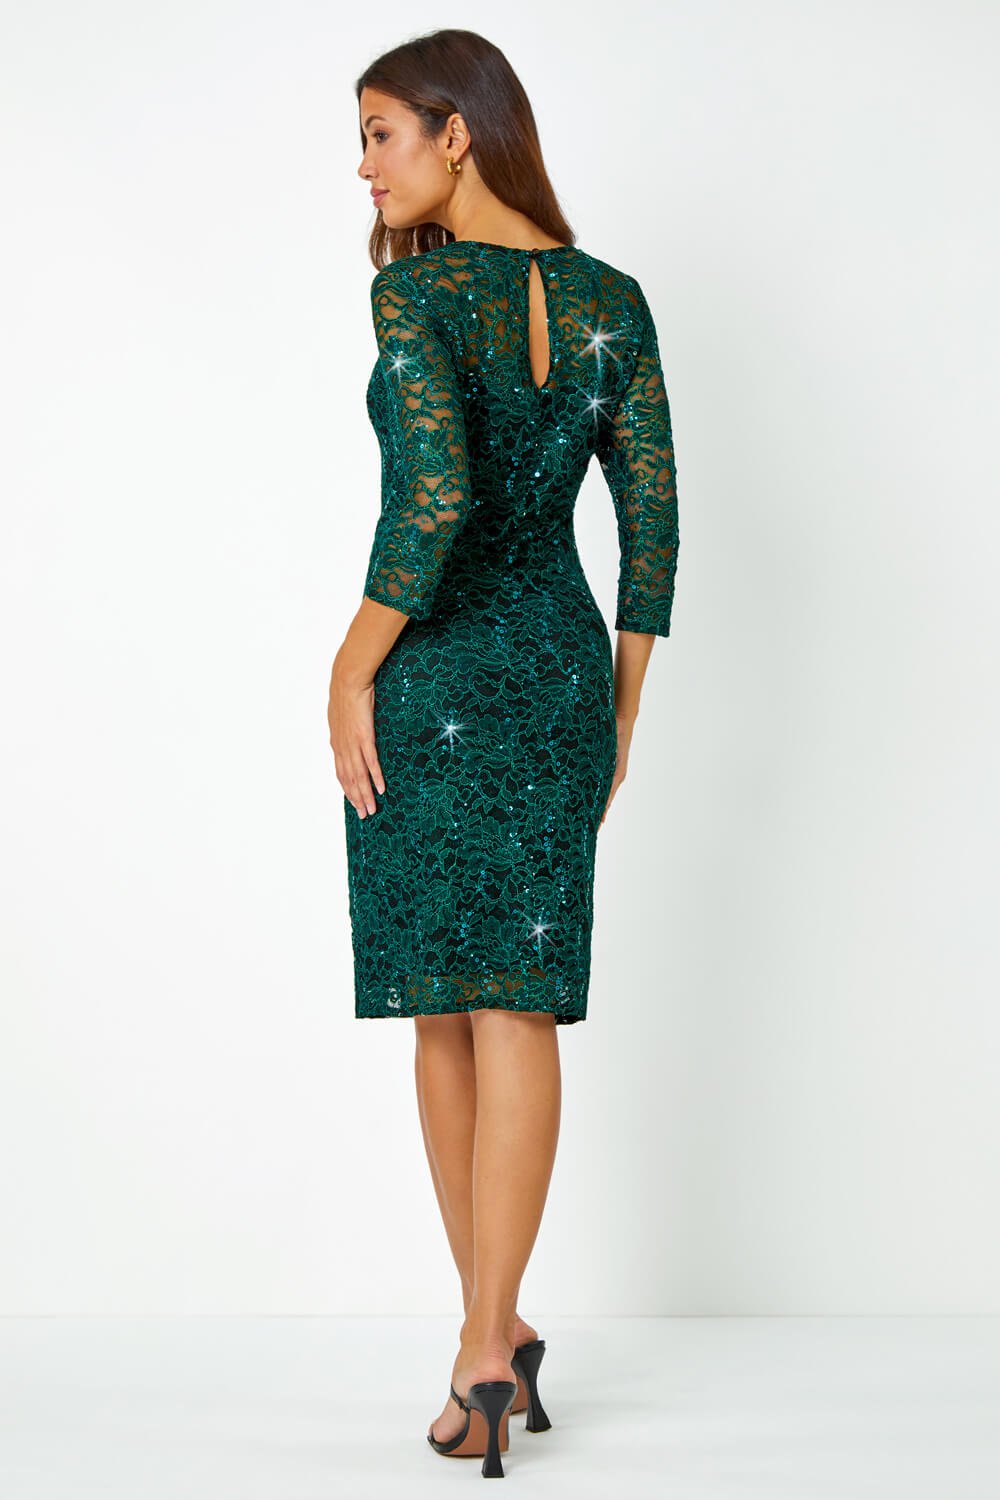 Green Sequin Lace Ruched Stretch Dress | Roman UK